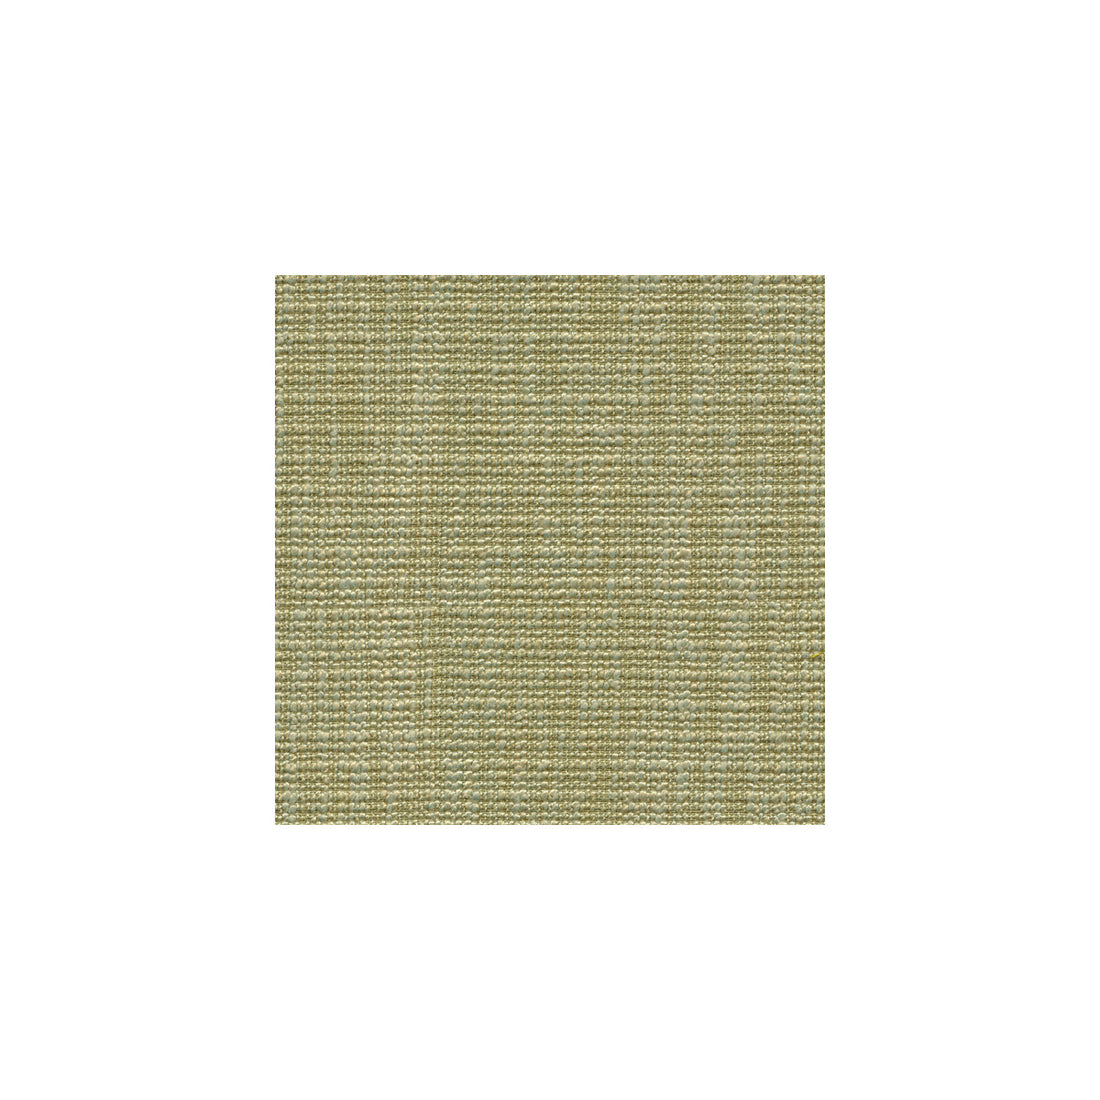 Kravet Basics fabric in 32290-3 color - pattern 32290.3.0 - by Kravet Basics in the Perfect Plains collection